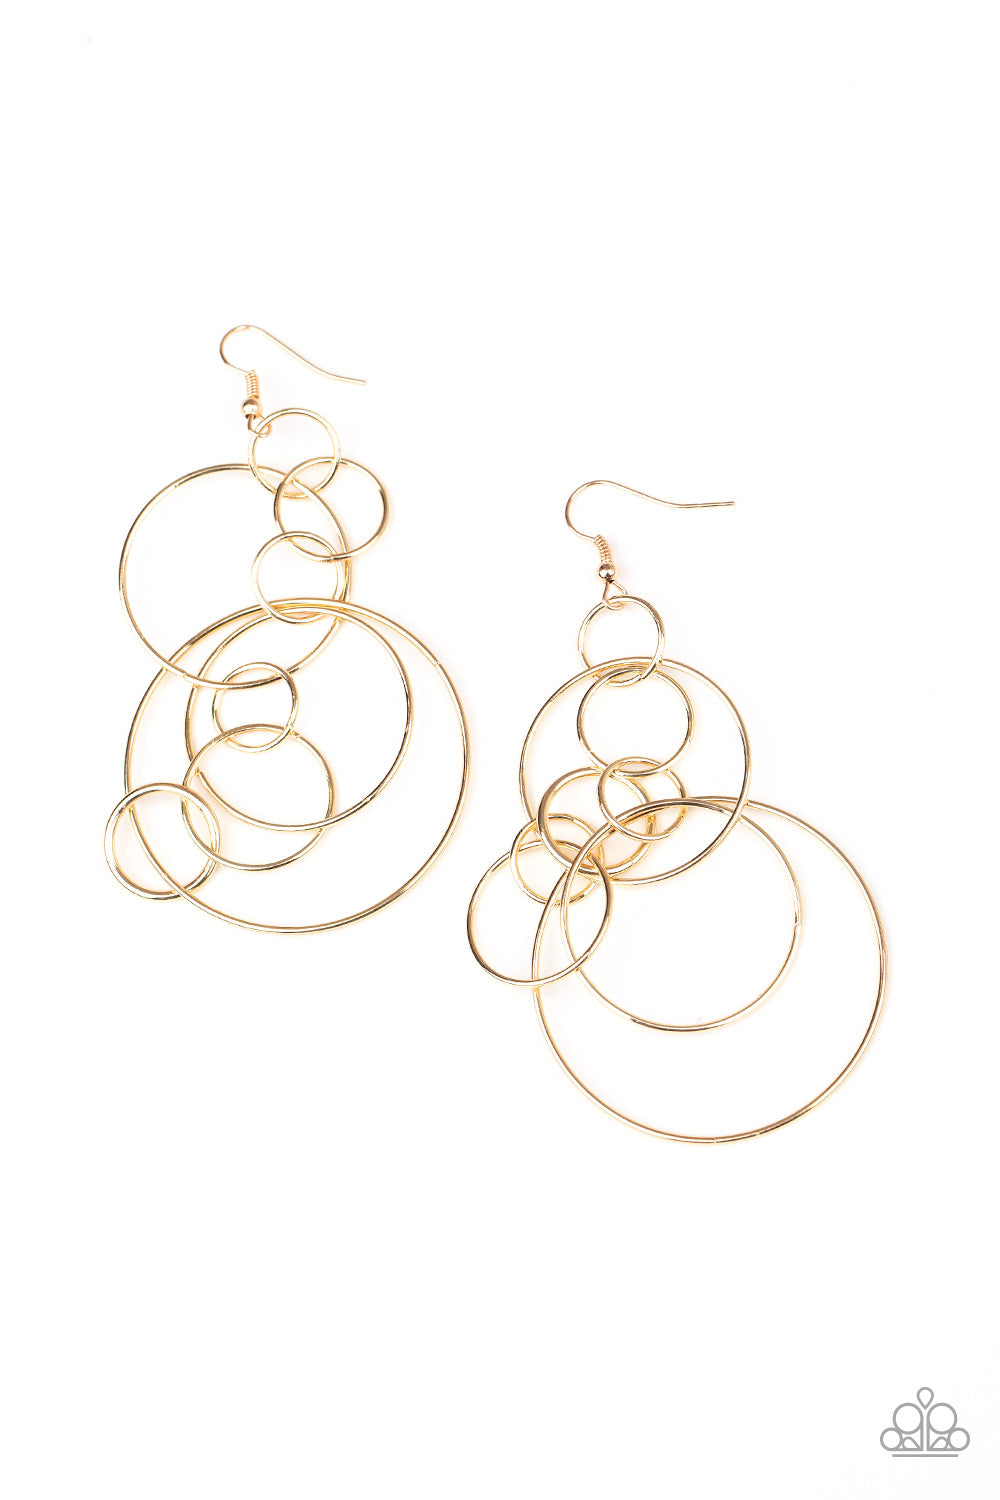 Paparazzi Running Circles Around You - Gold Hoop Earrings - A Finishing Touch 